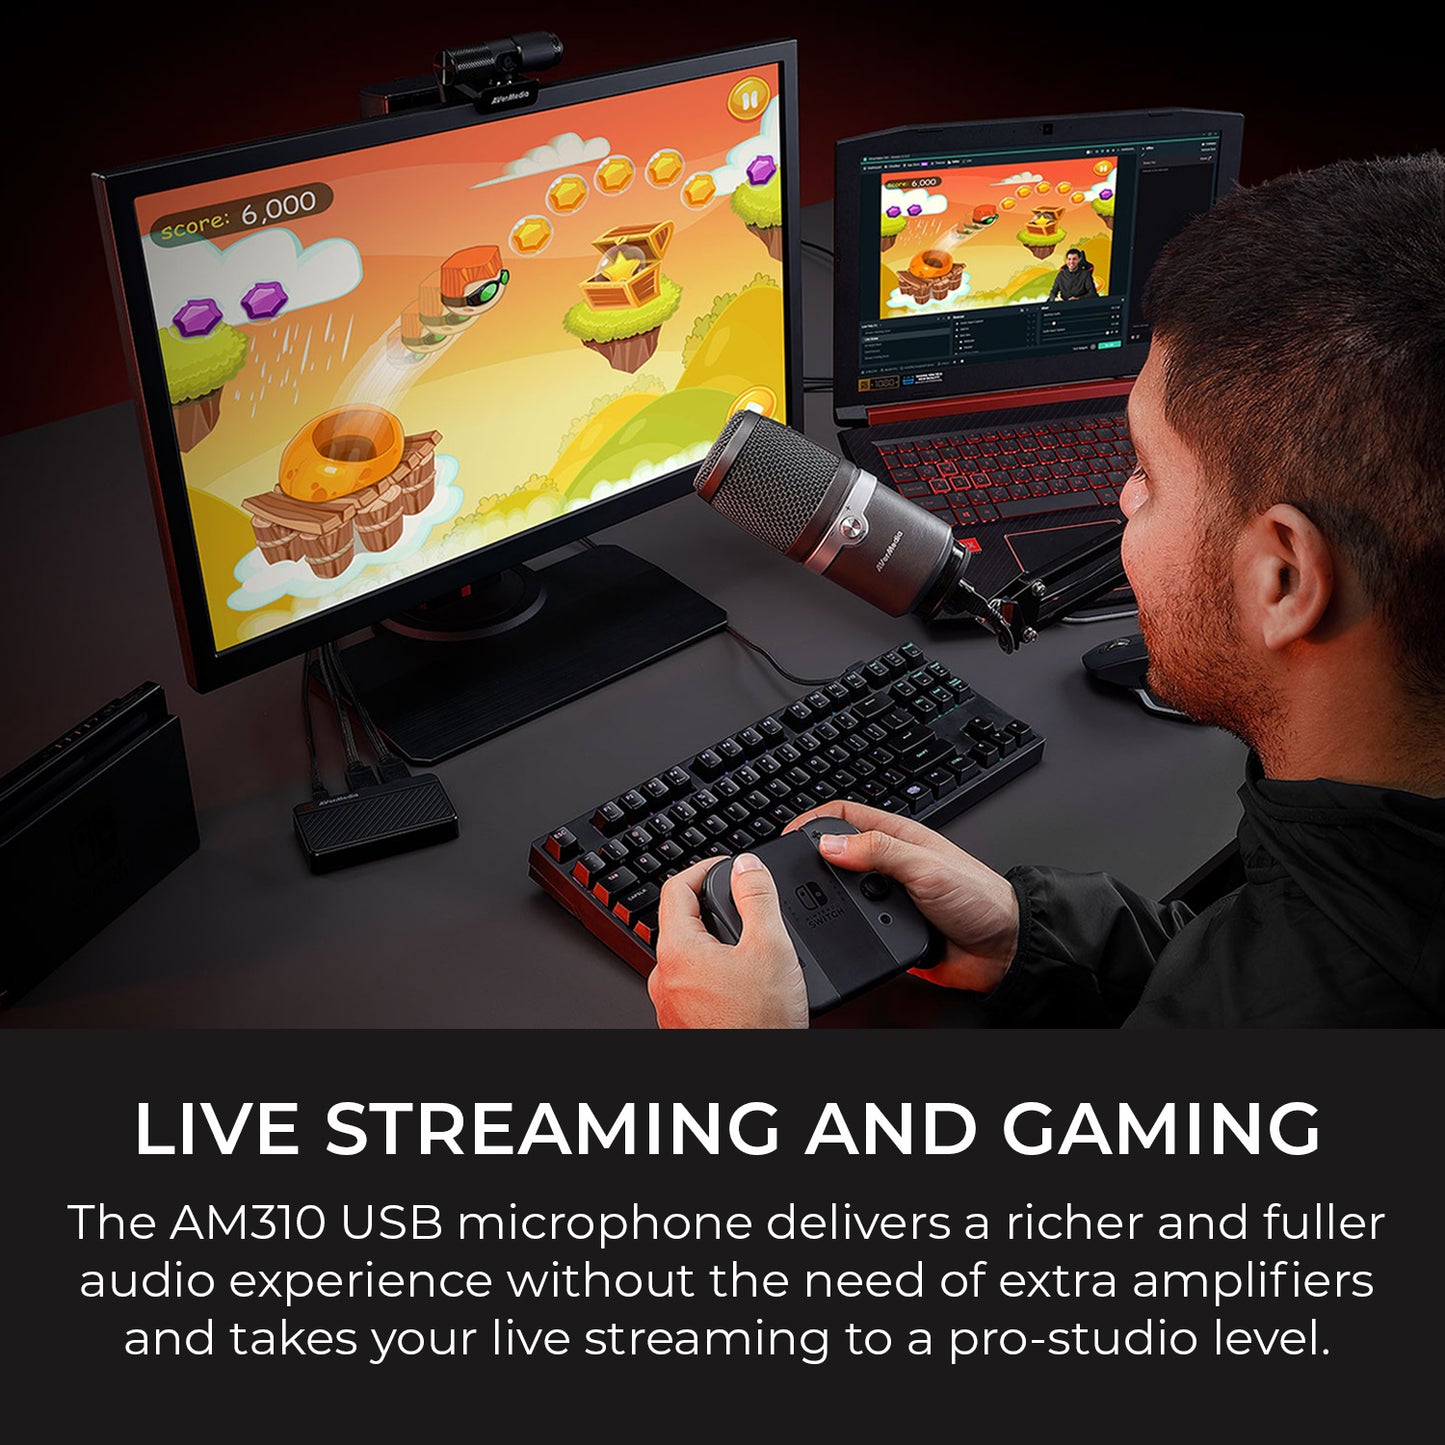 Live streaming and gaming: The AM310 USB microphone delivers a richer and fuller audio experience without the need of extra amplifiers and takes your live streaming to a pro-studio level.